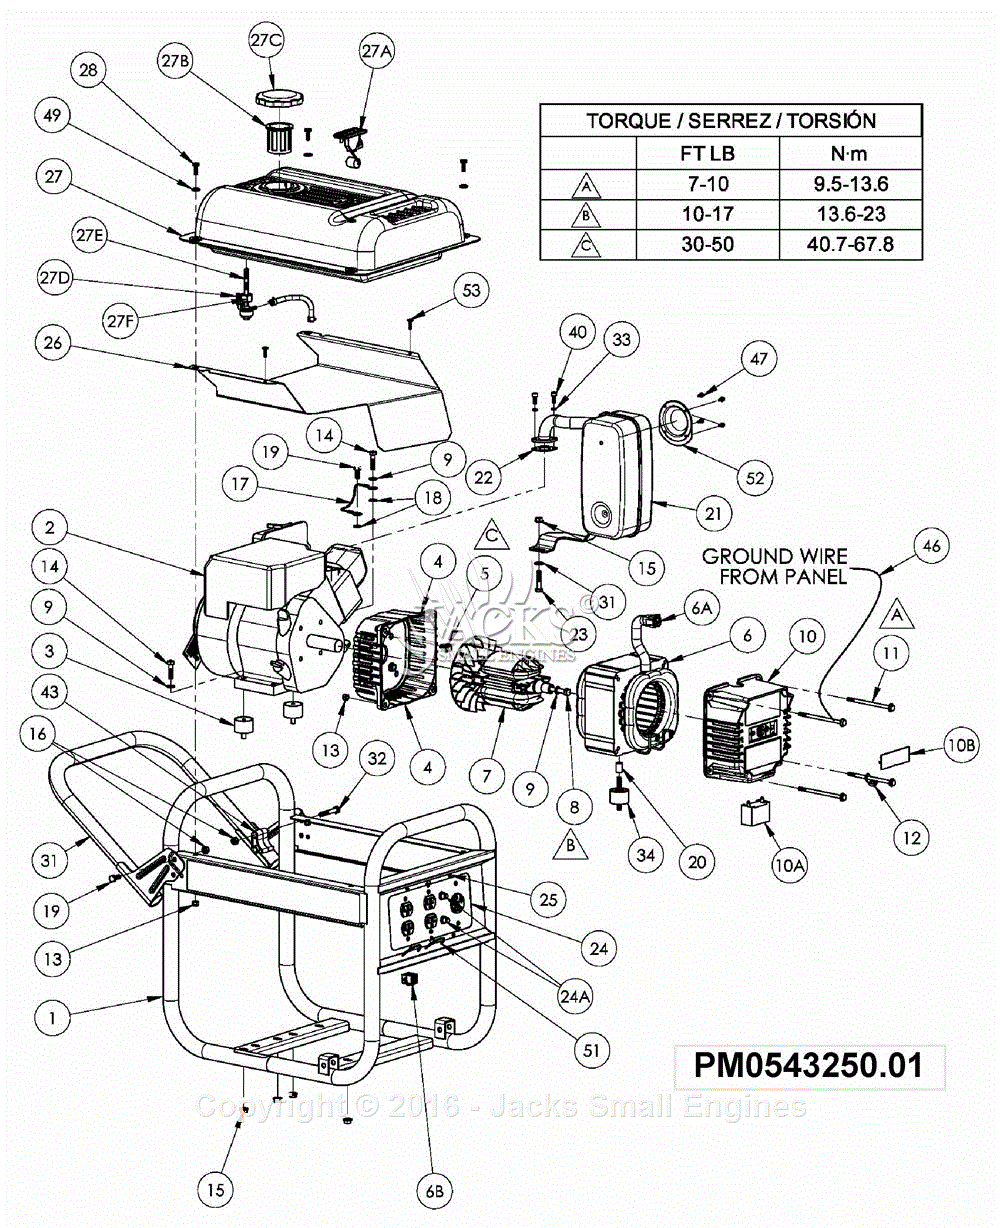 wiring diagram for power mate gt5250